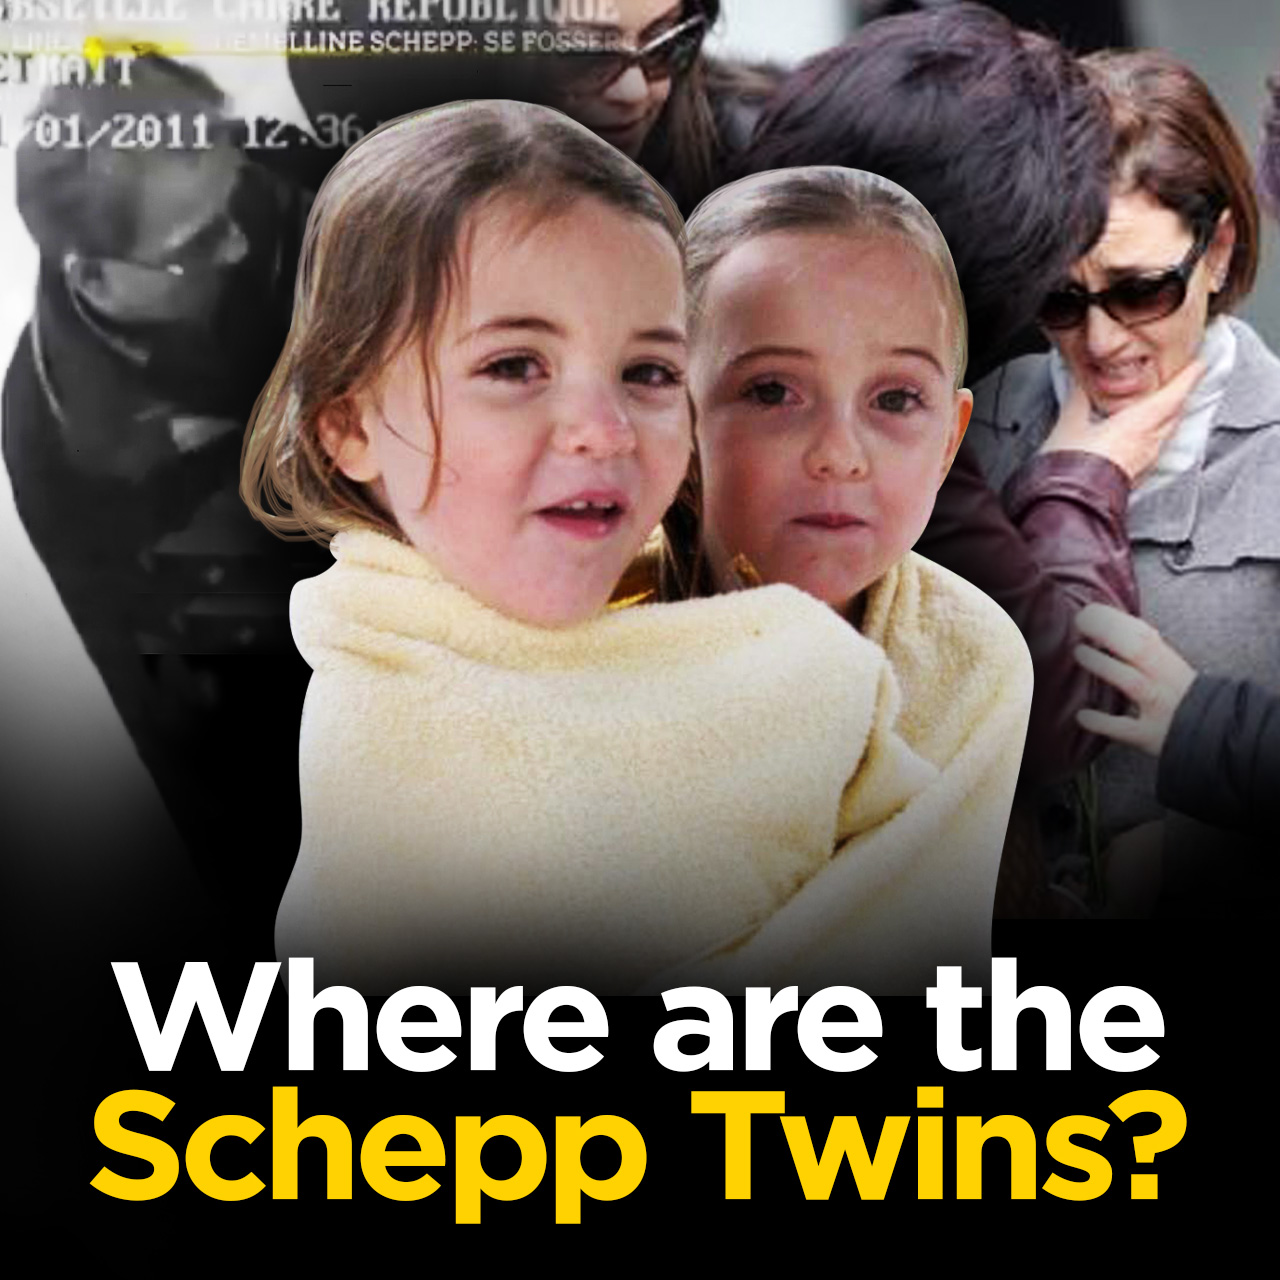 The kidnapping of twins Alessia and Livia Schepp